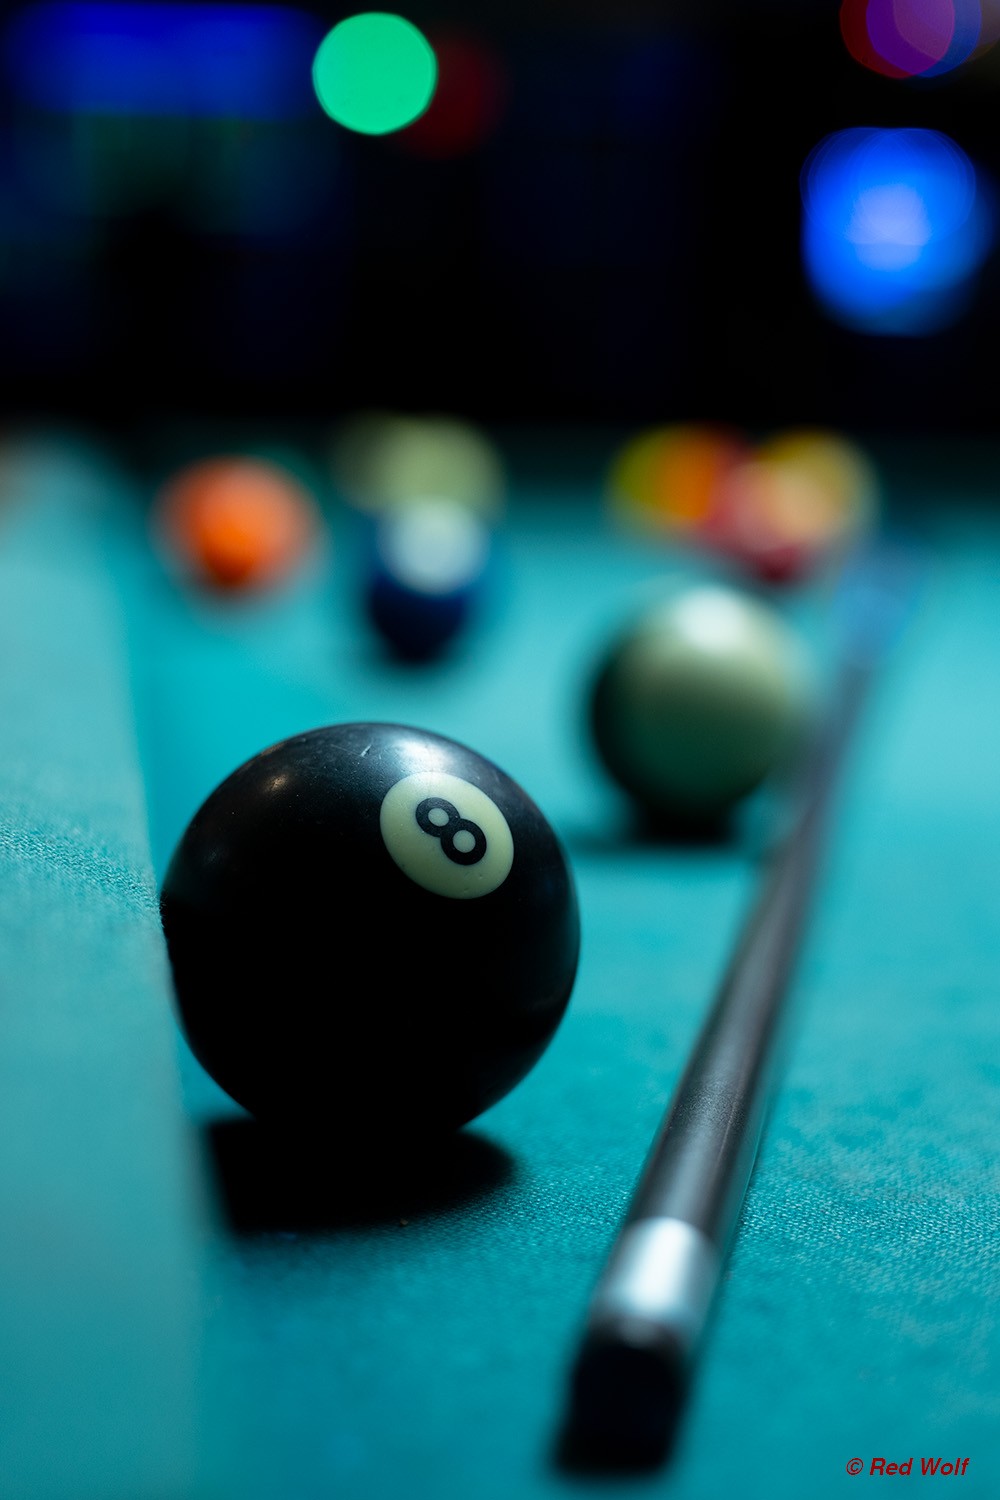 Behind the 8-Ball